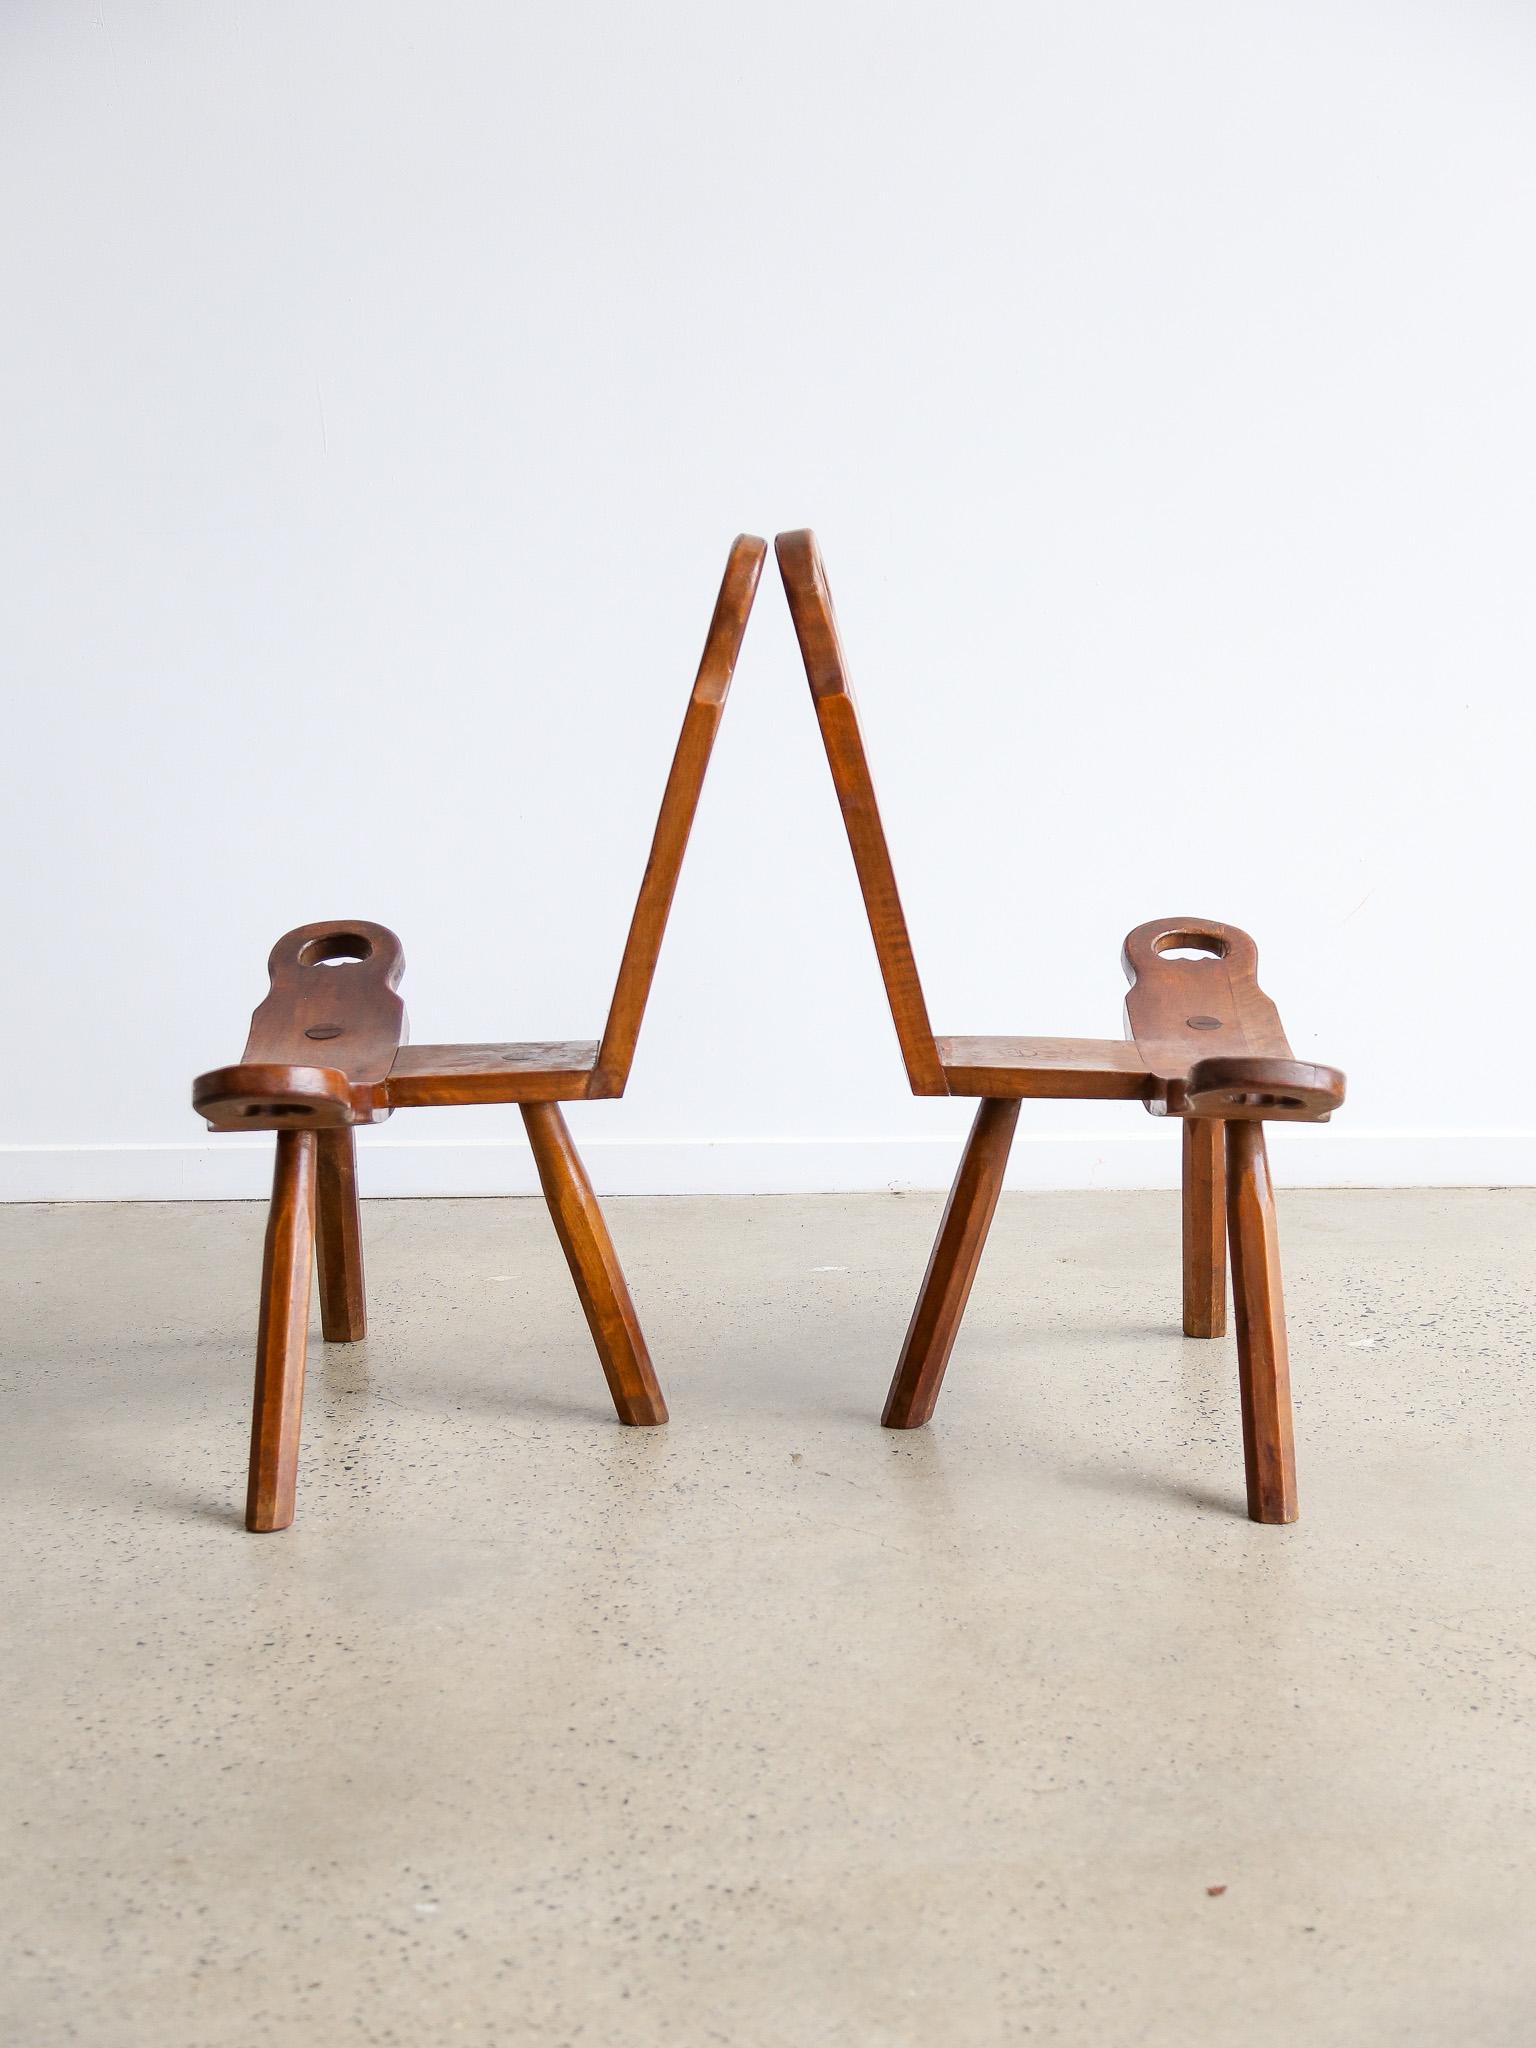 Brutalist Spanish Midcentury Sculptural Tripod Chair In Good Condition For Sale In Byron Bay, NSW